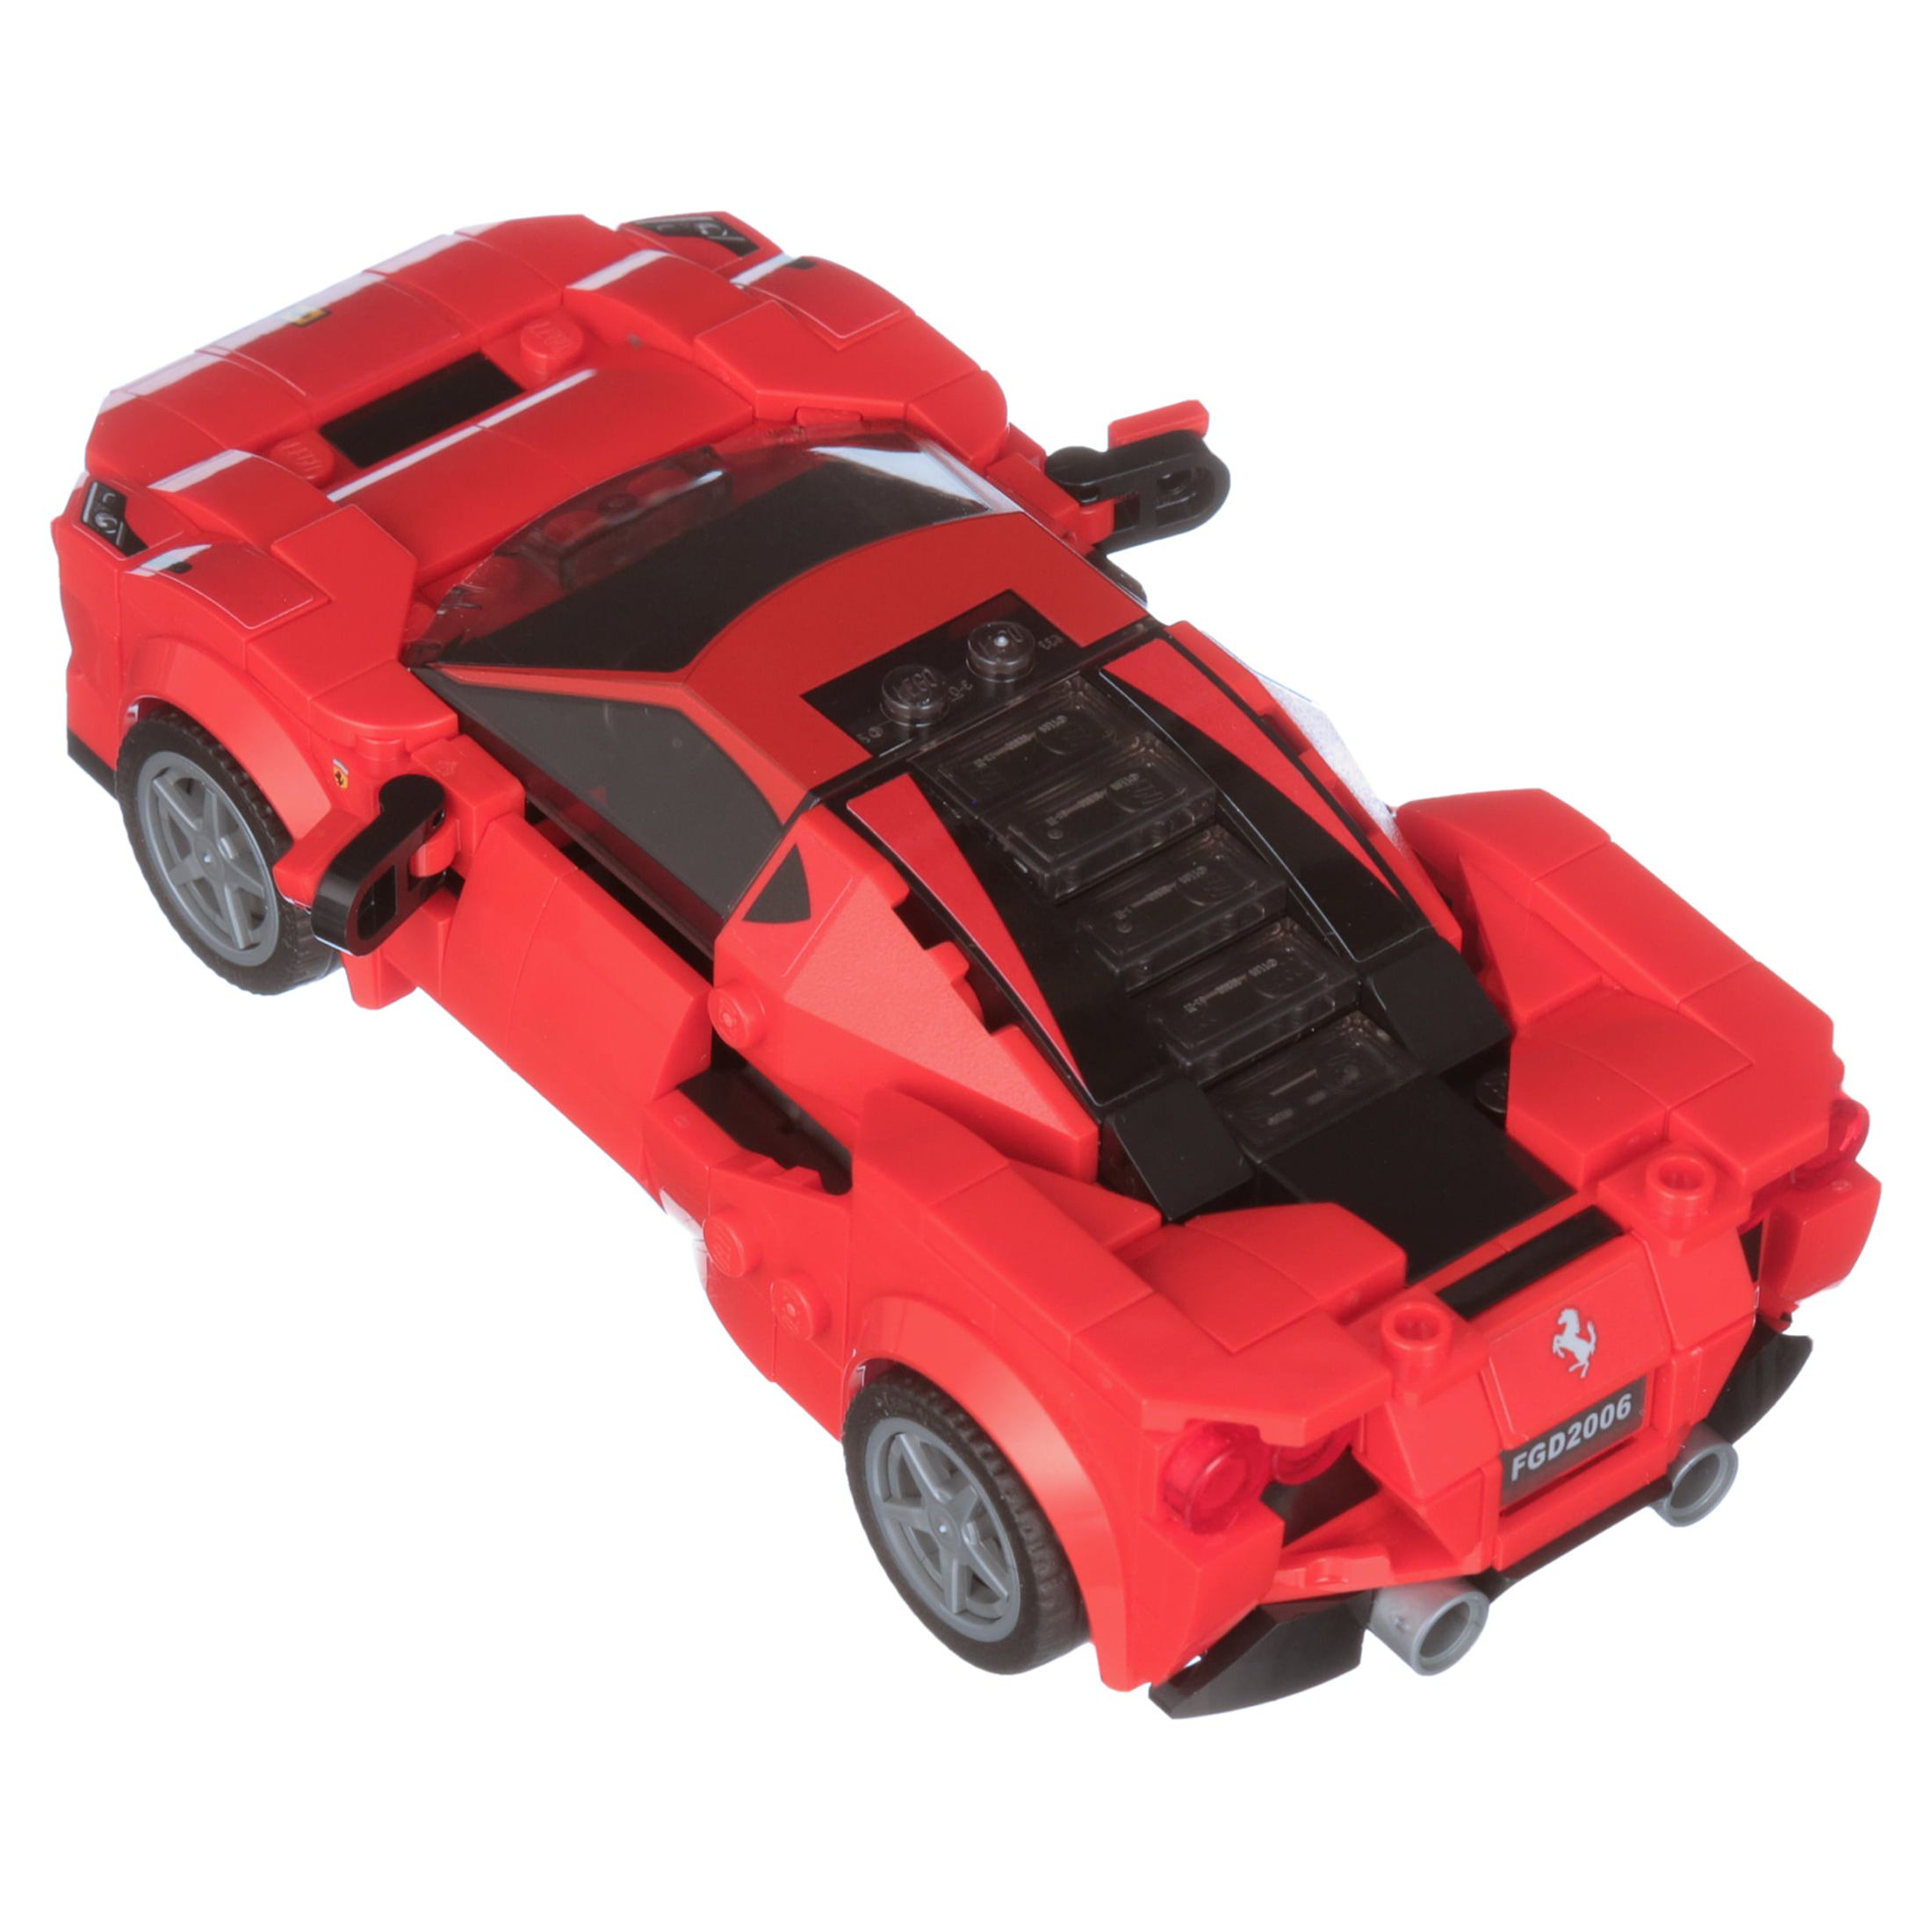 LEGO Speed Champions 76895 Ferrari F8 Tributo Racing Model Car, Vehicle Building Car (275 pieces) - image 7 of 12